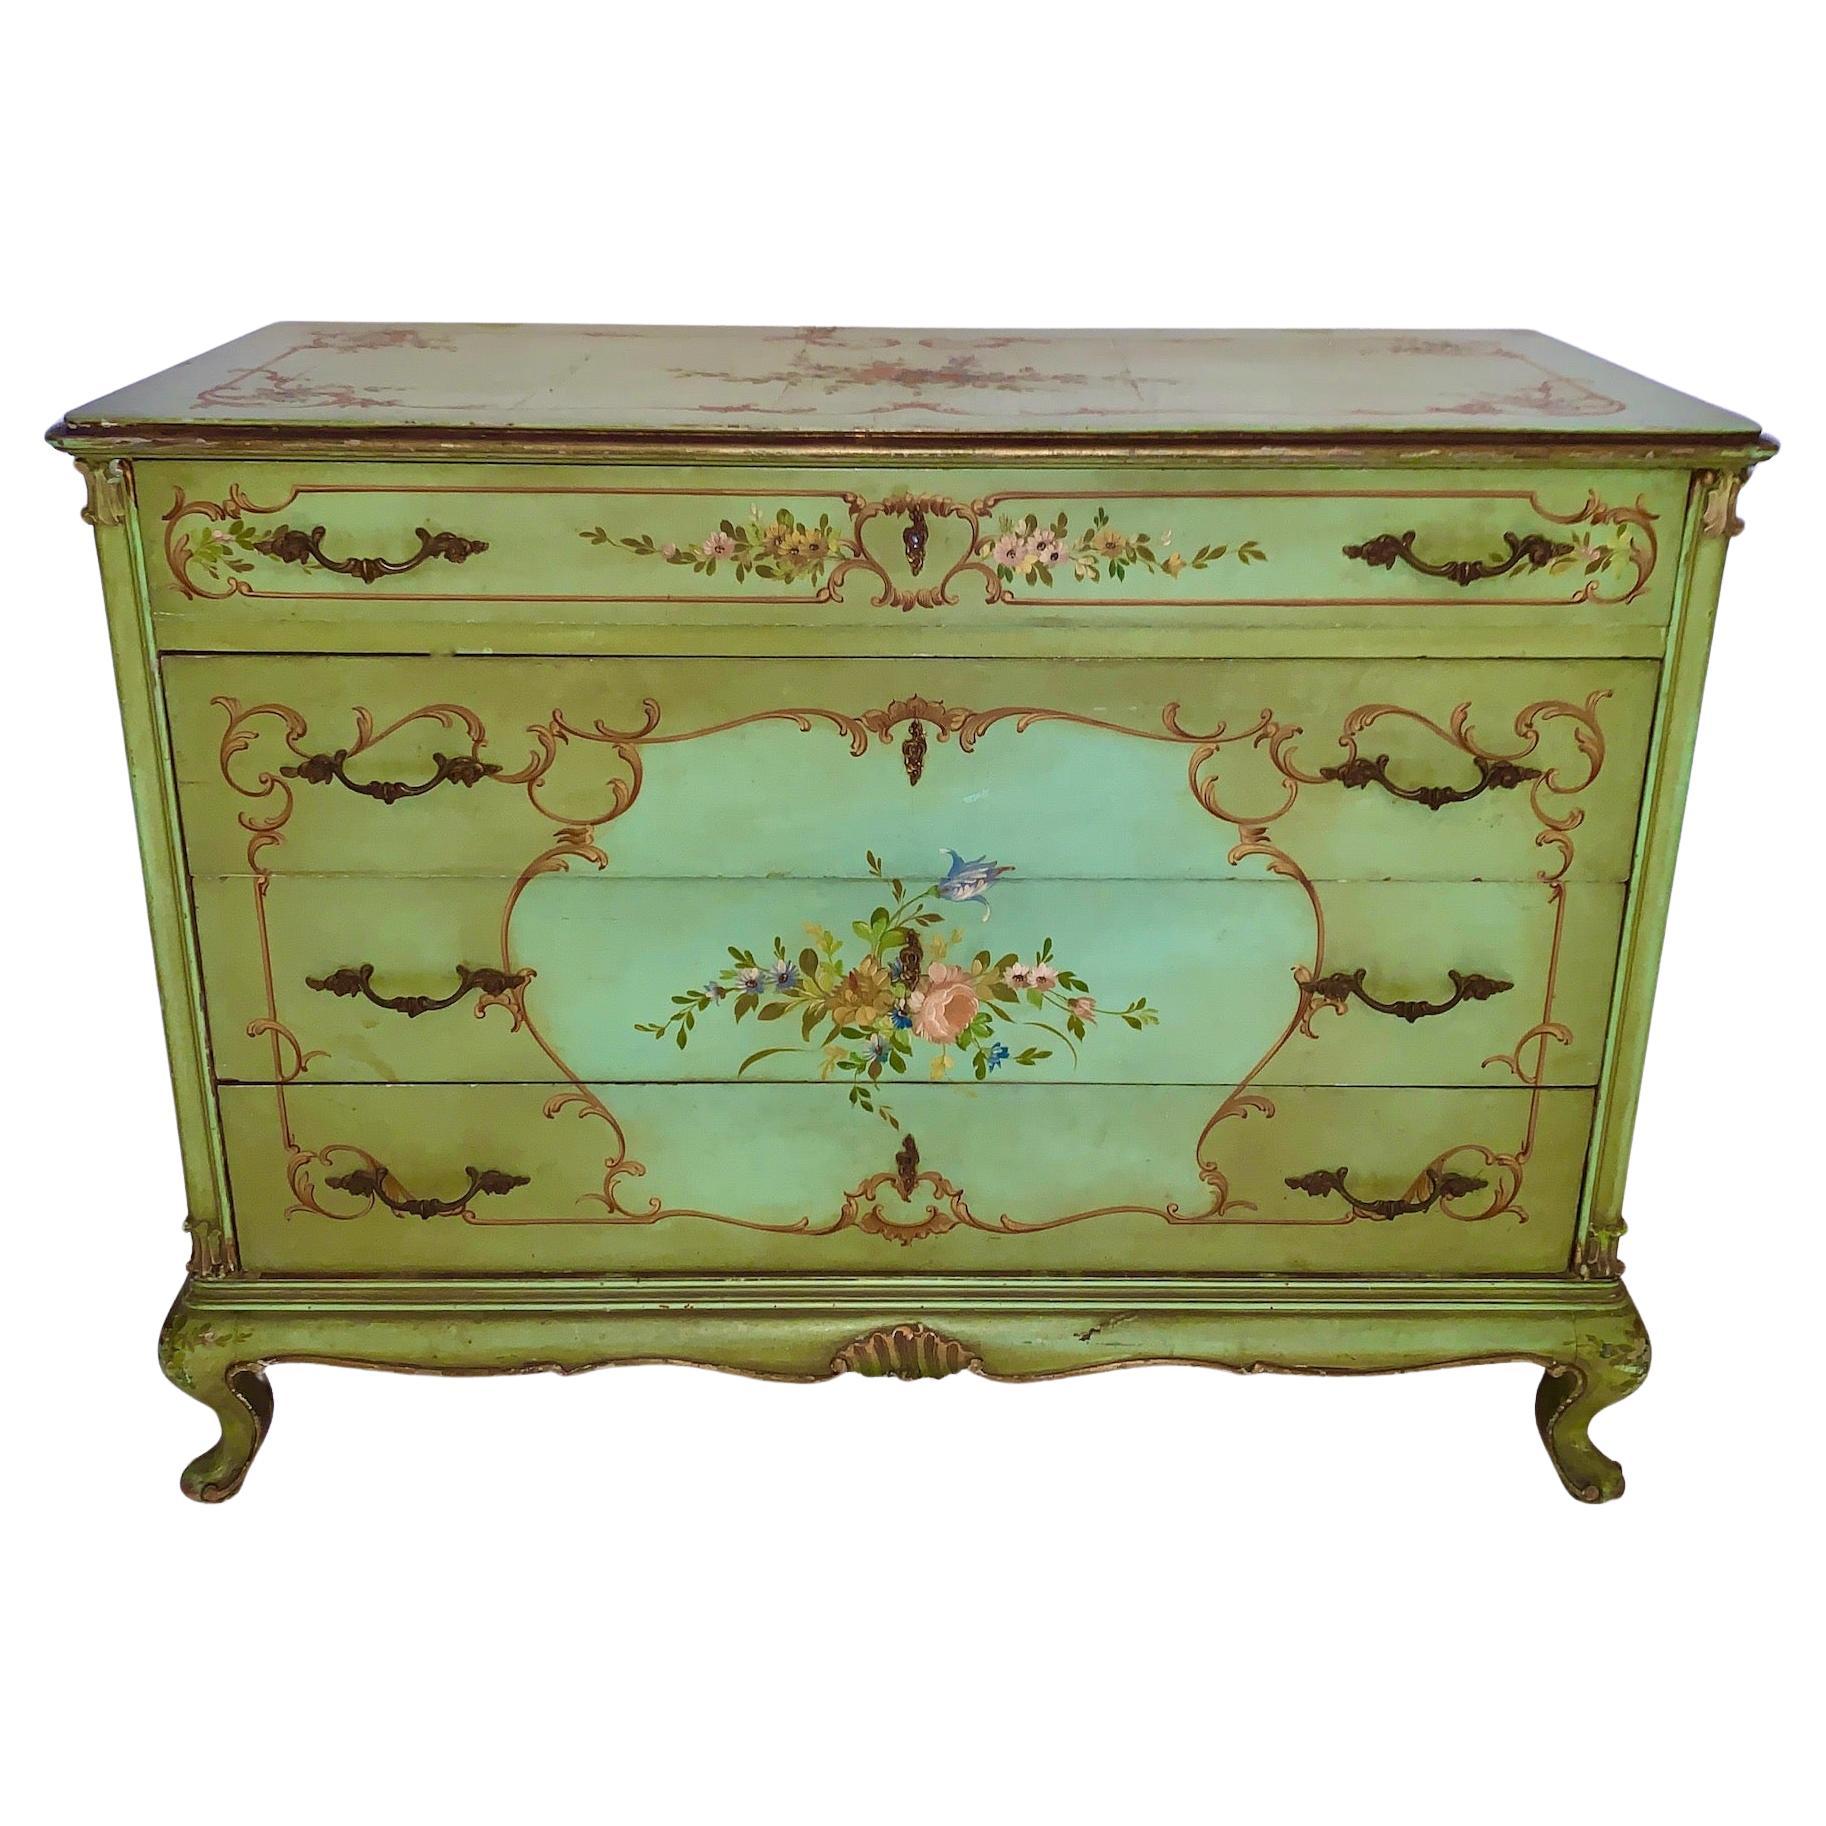 Early 20th C. Venetian style Hand Painted and Decorated Partial Gilt Dresser